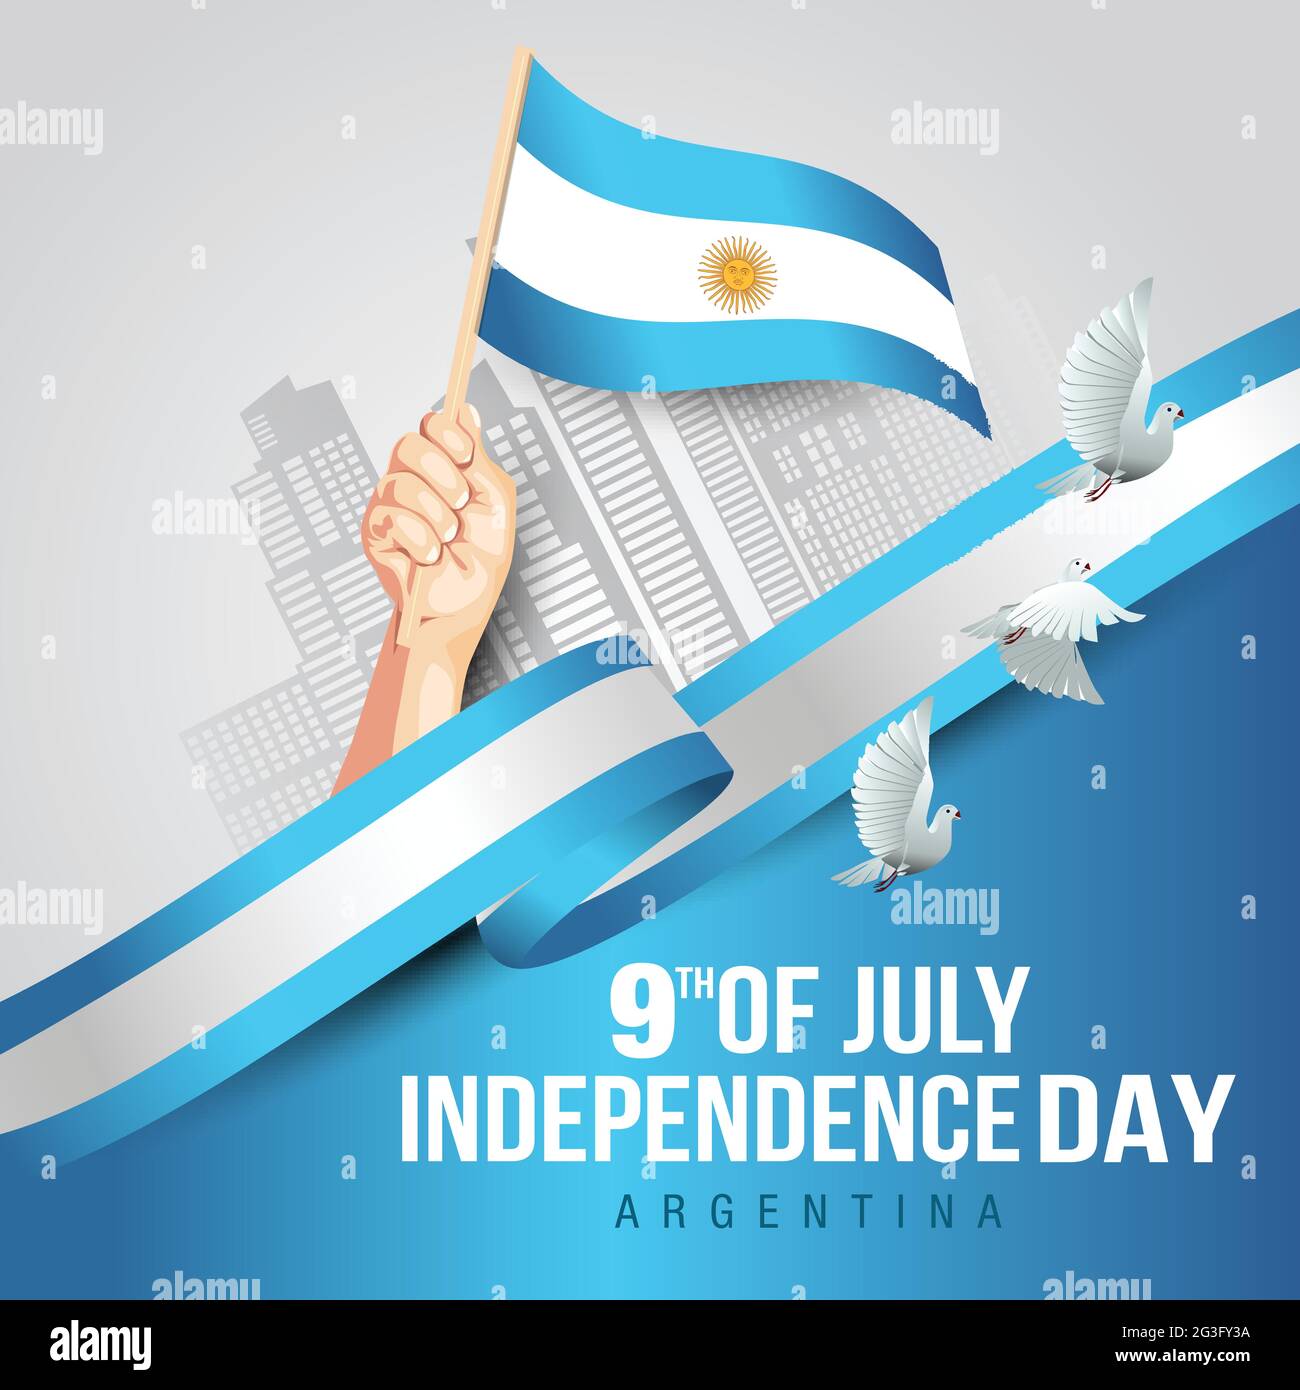 happy independence day Argentina 9th of July. hands holding with Argentina flag. vector illustration design. Stock Vector